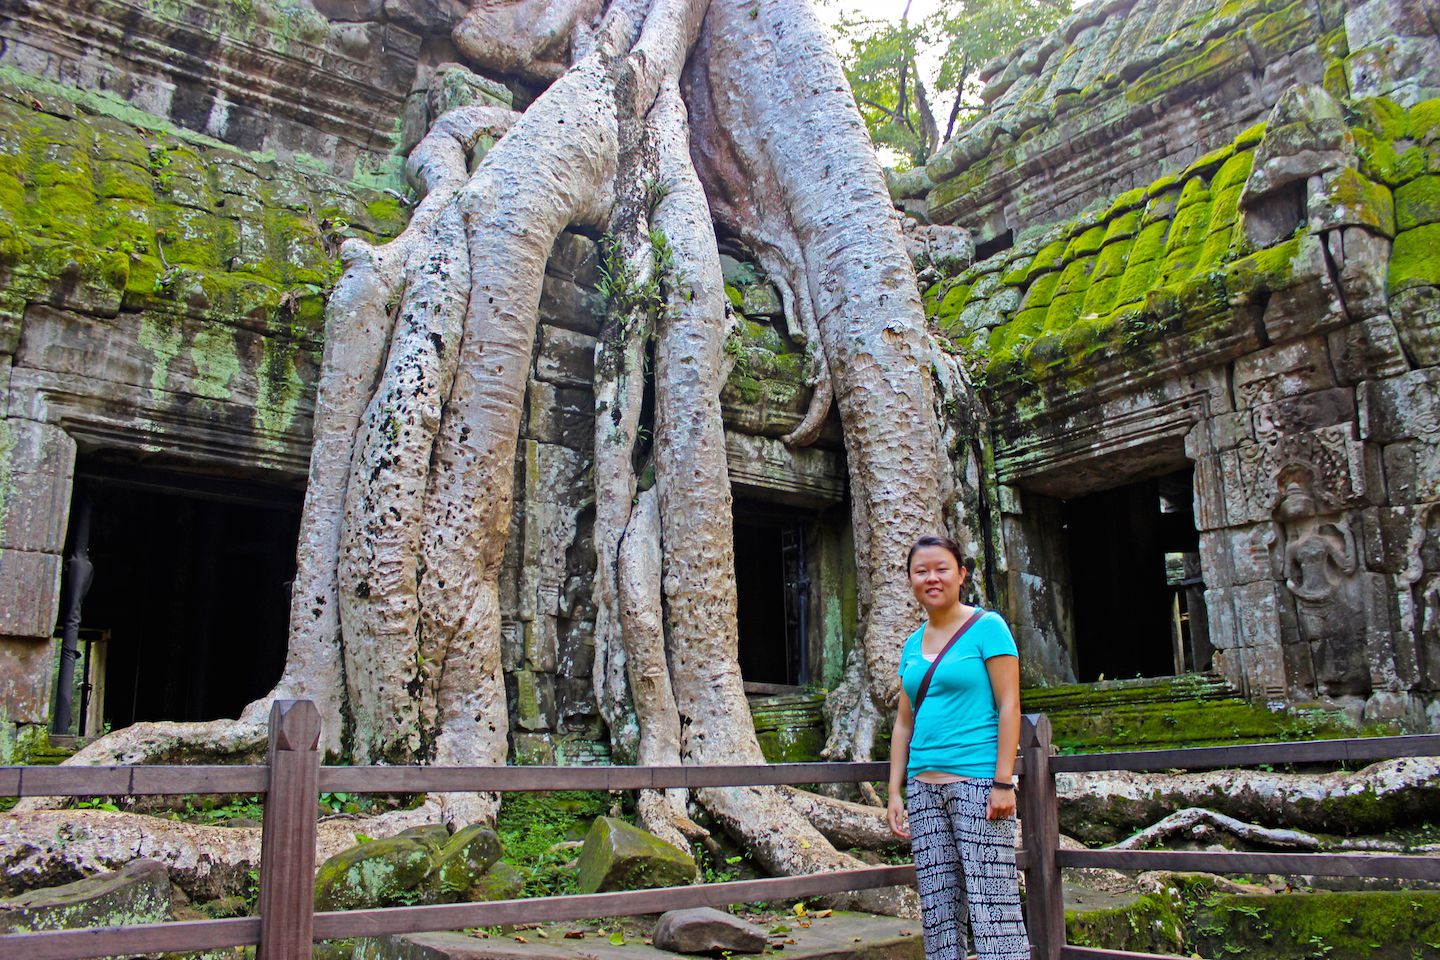 Julie next to the tree at Ta Prohm